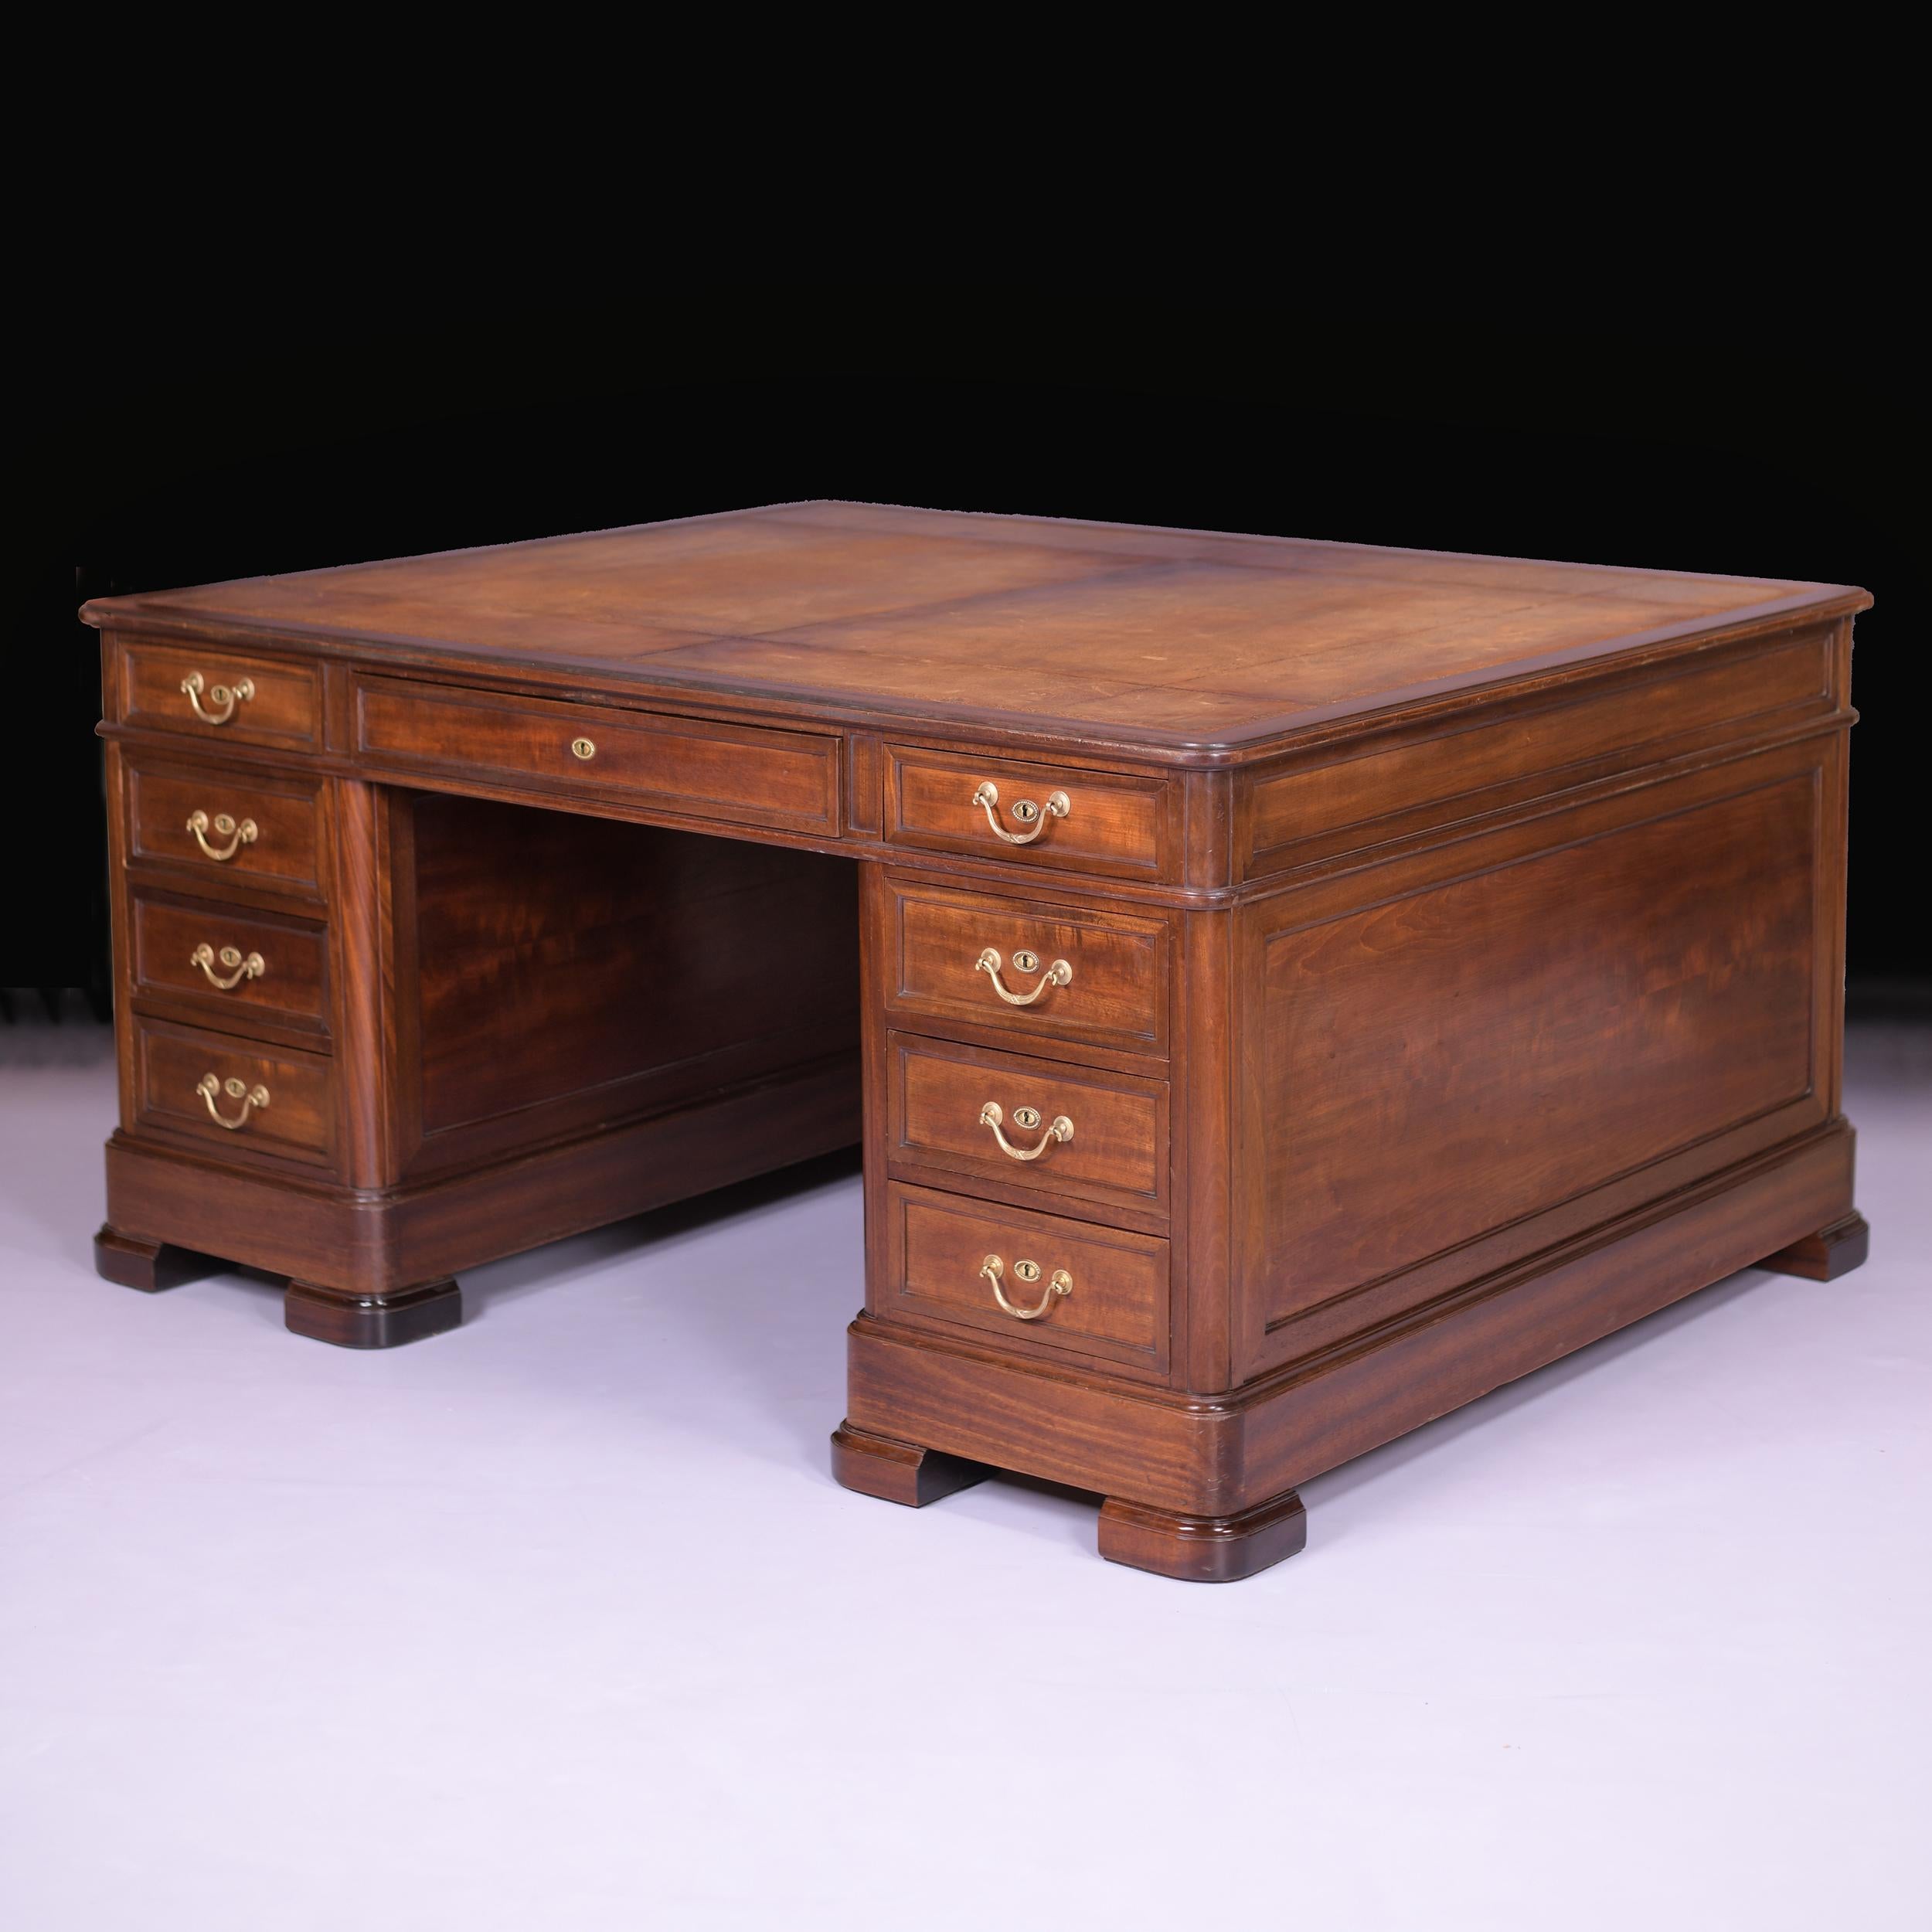 A very fine and imposing antique mahogany double sided partners desk of large proportions, the rectangular top features a stunning brown and gold tooled leather writing surface. This desk is the same on each side. Each side is fitted with three